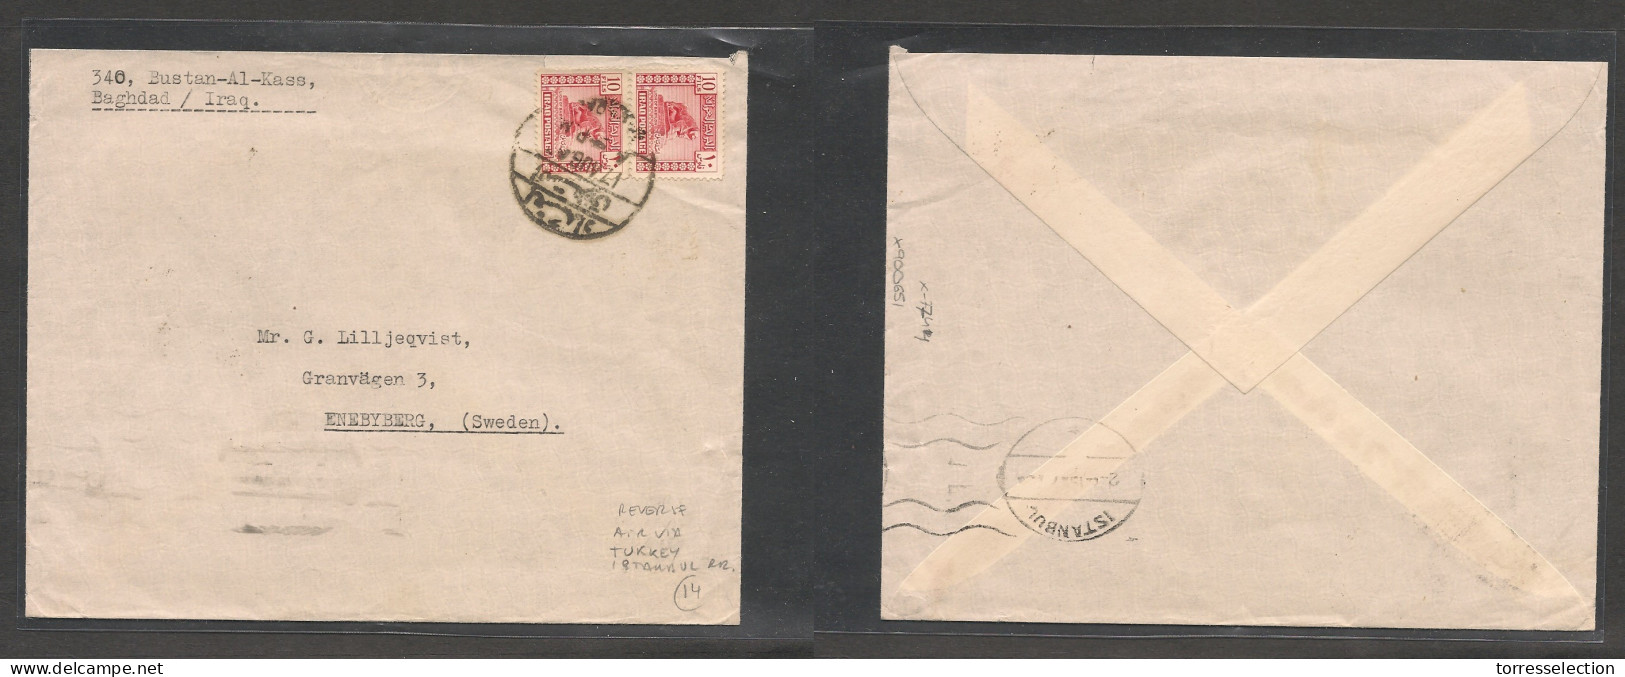 IRAQ. Iraq Cover - 1947 Bagdad To Sweden Enebyberg Mult Fkd Env, Carried Via Air Turkey Istanbul. Ver Interesting Early  - Iraq